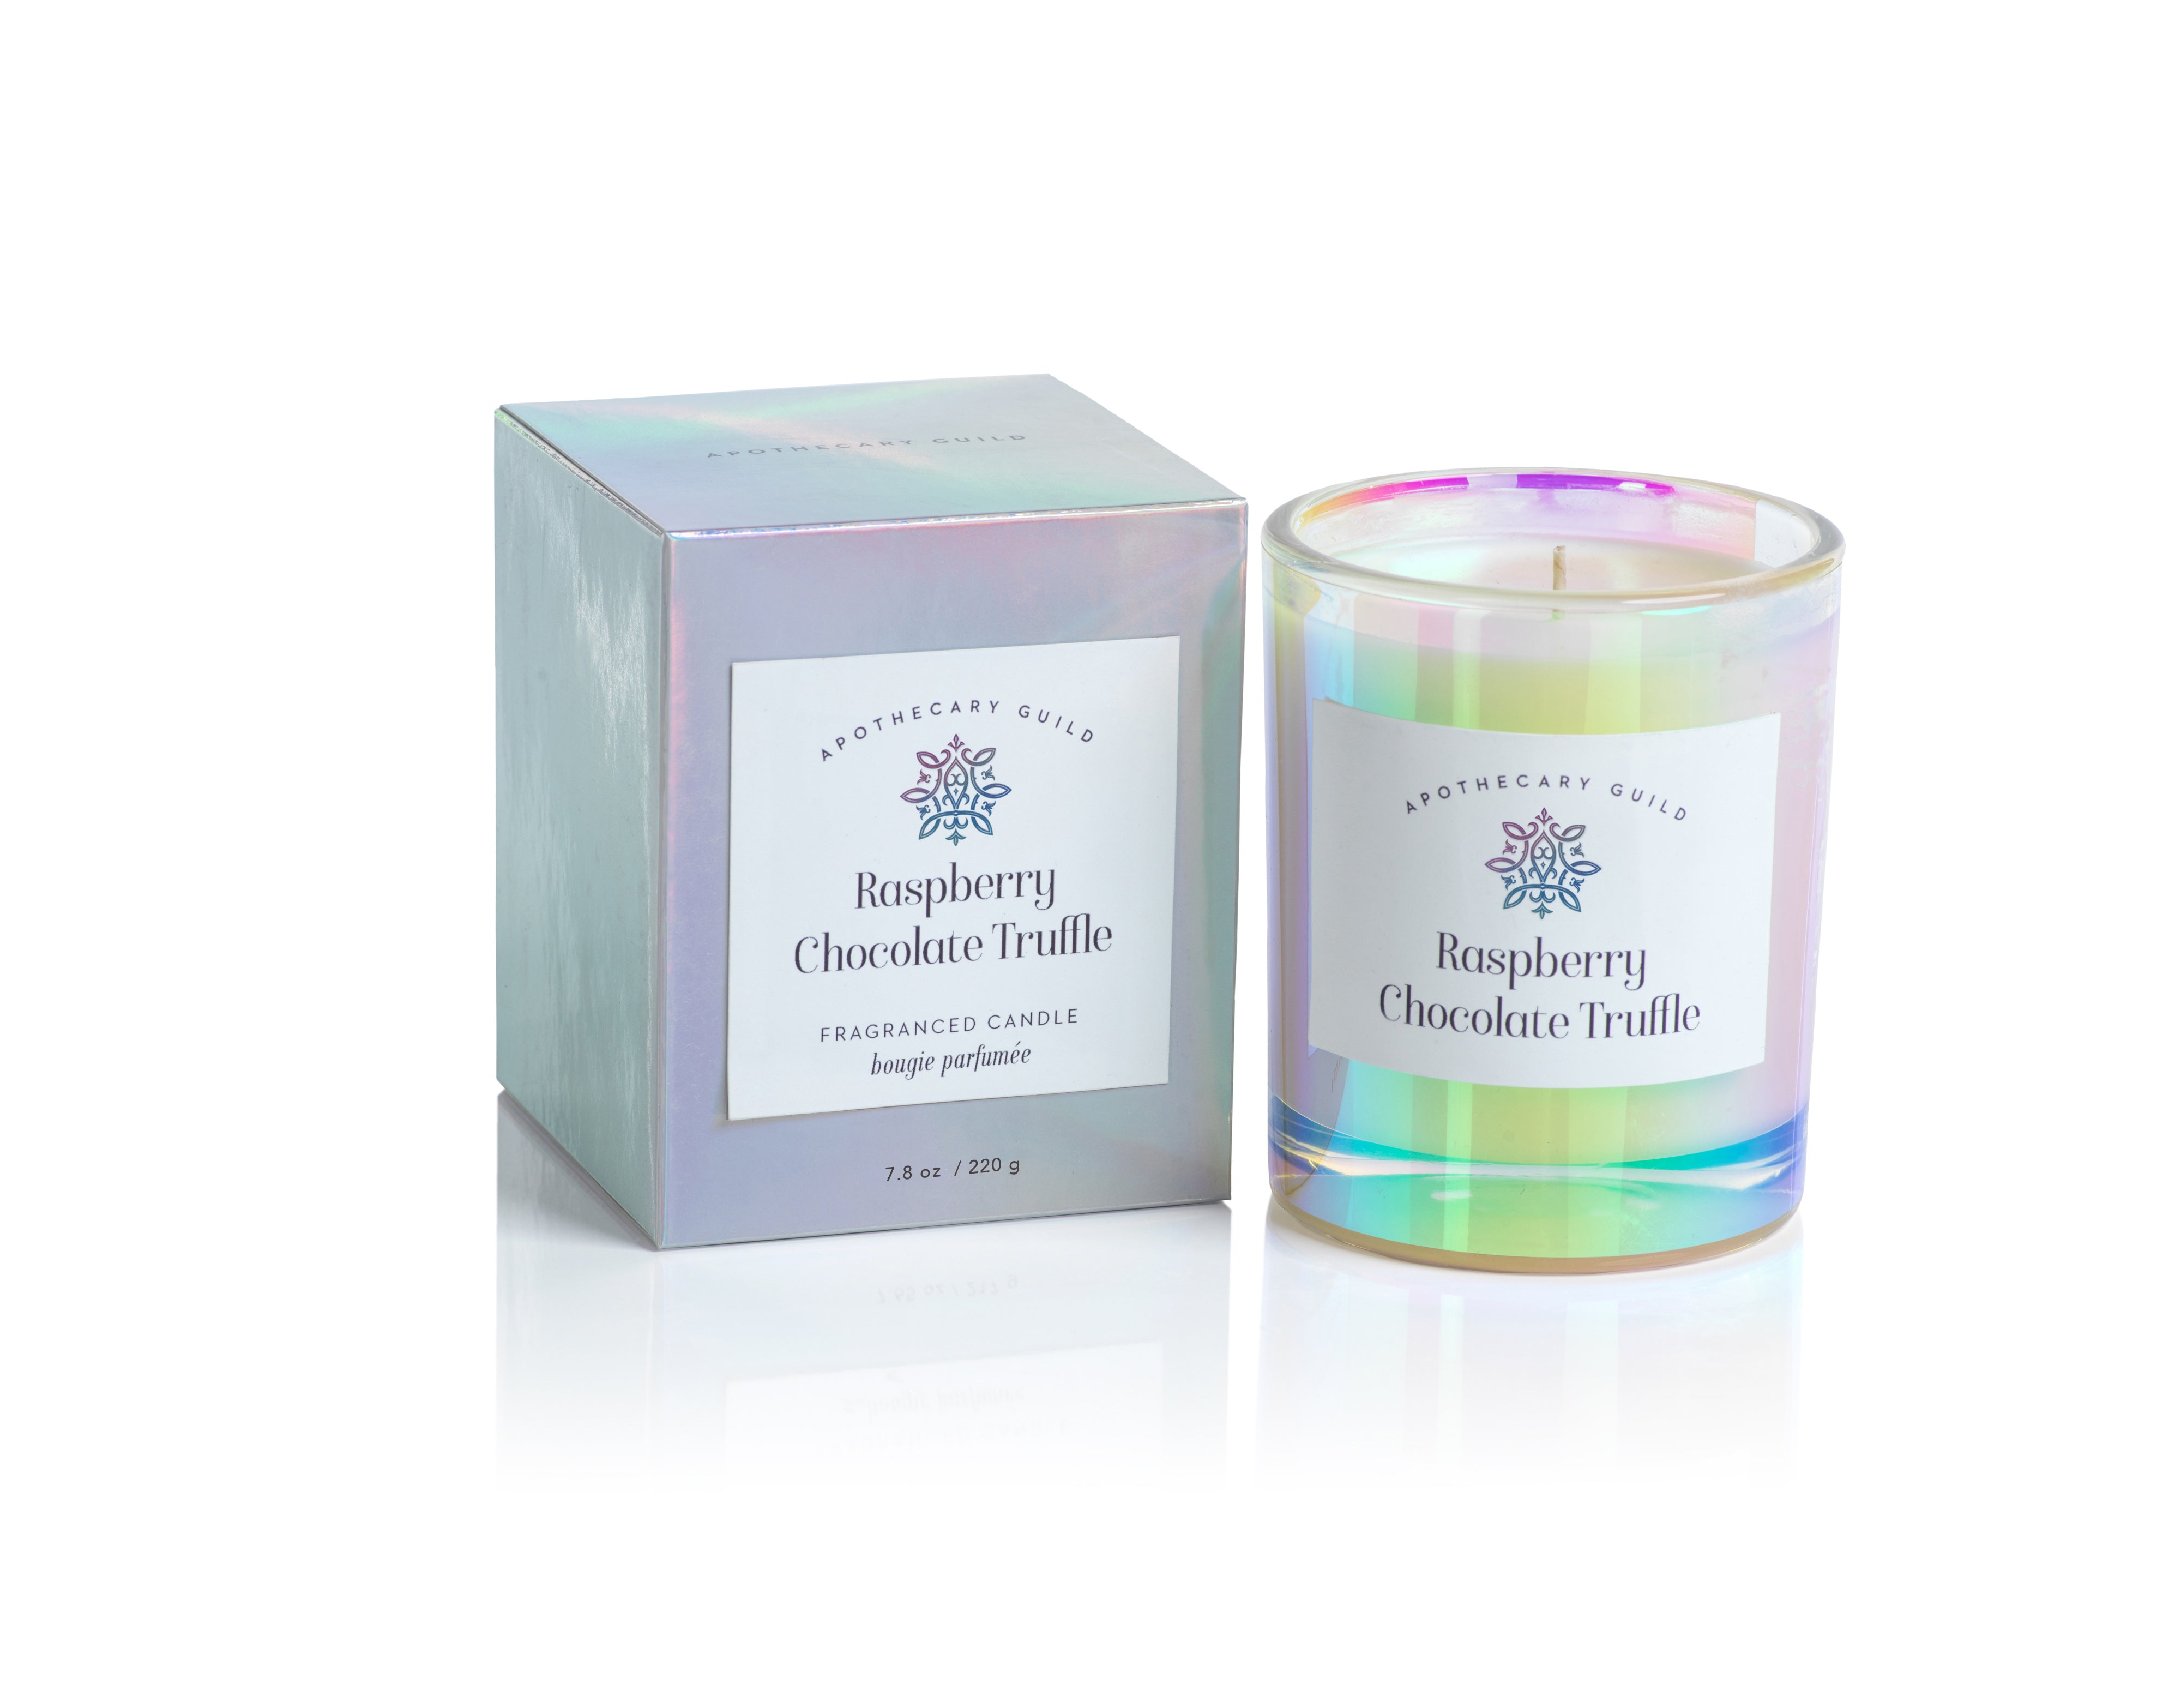 Apothecary Guild Iridescent Candle - CARLYLE AVENUE